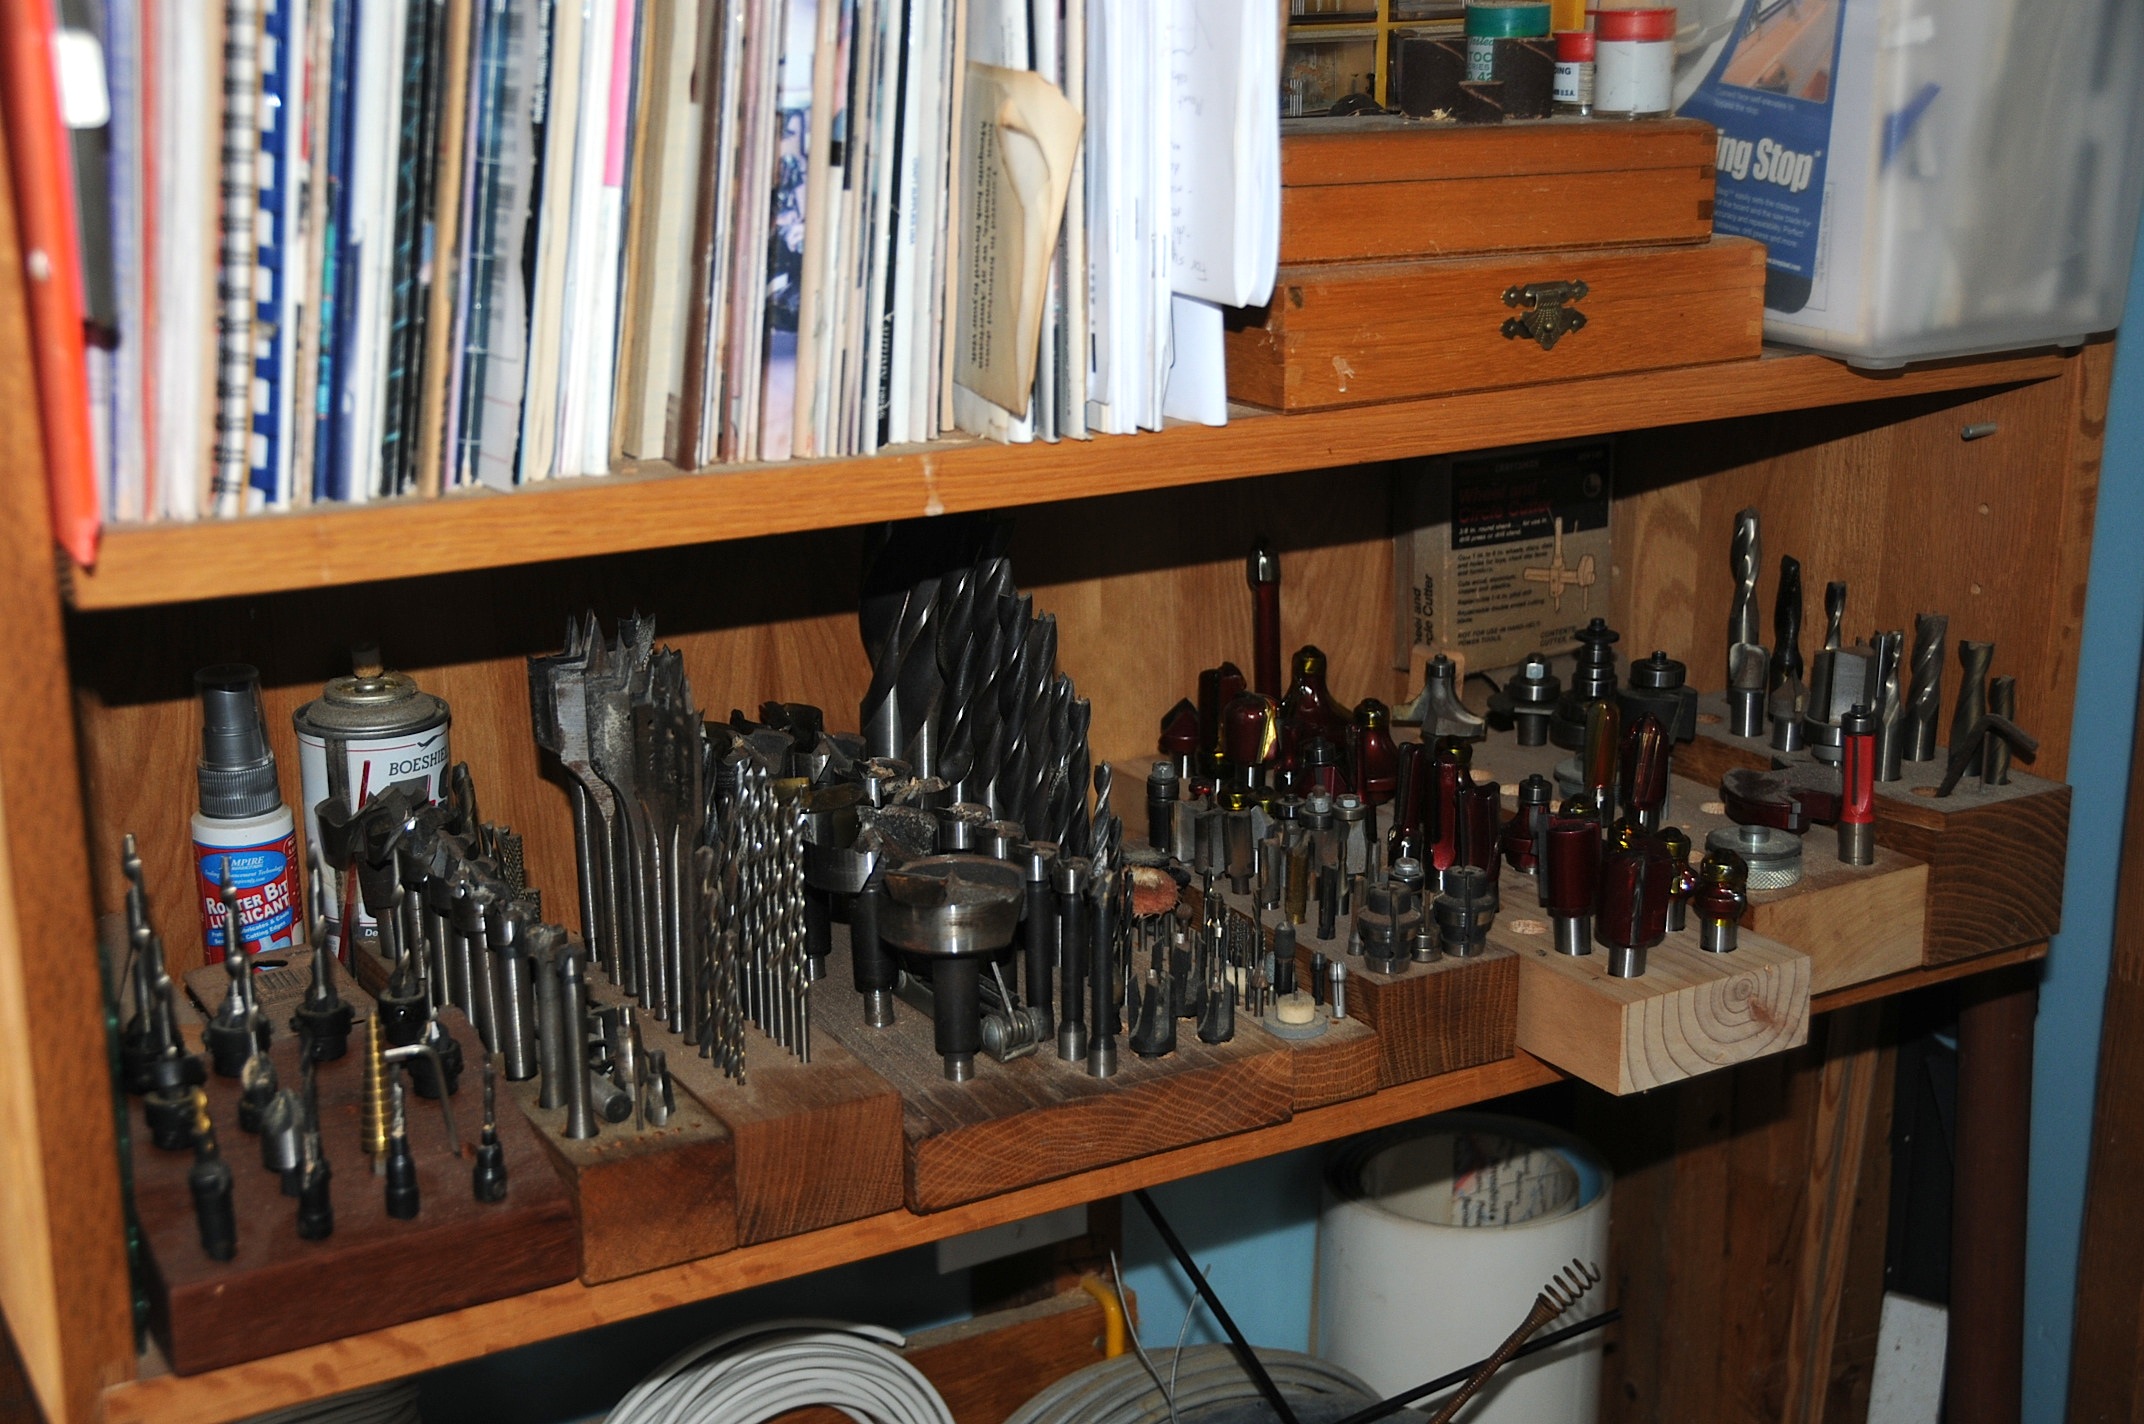 few weeks back I posted about router bit storage . At the end of the 